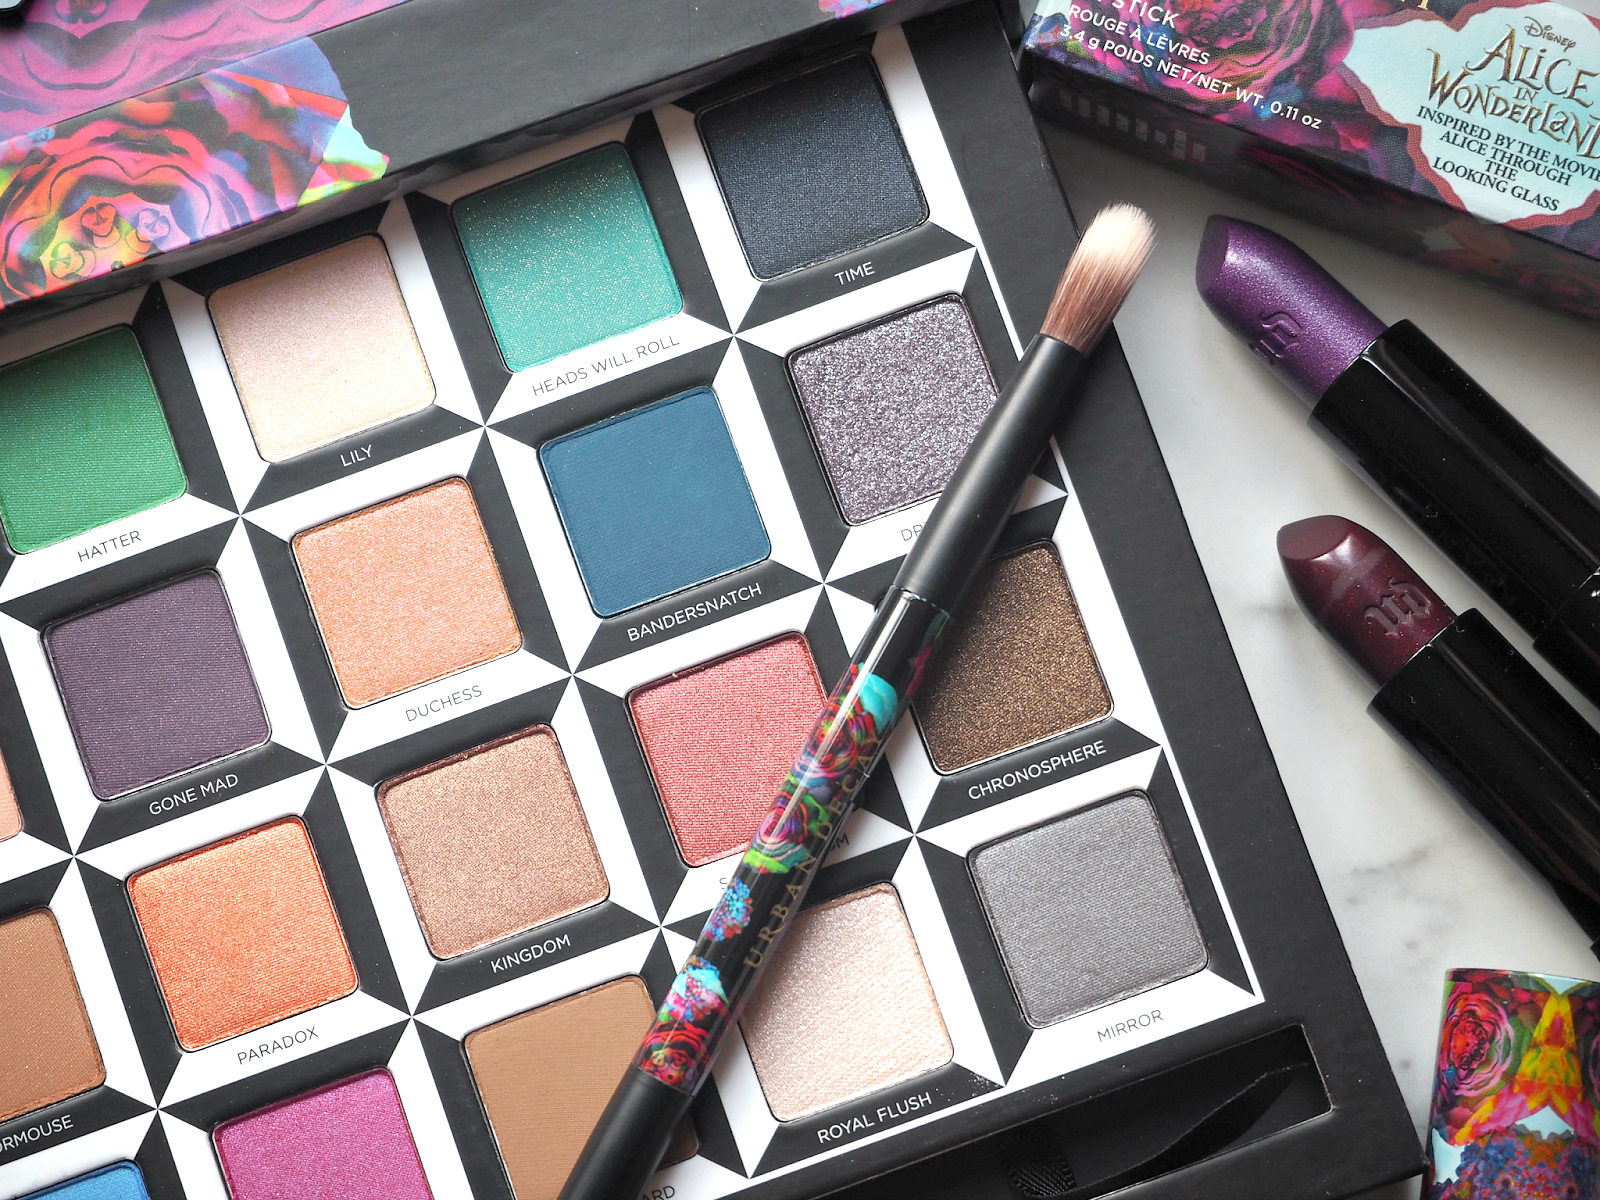 The 10 Makeup Mistakes You Didn't Even Know You Were Making